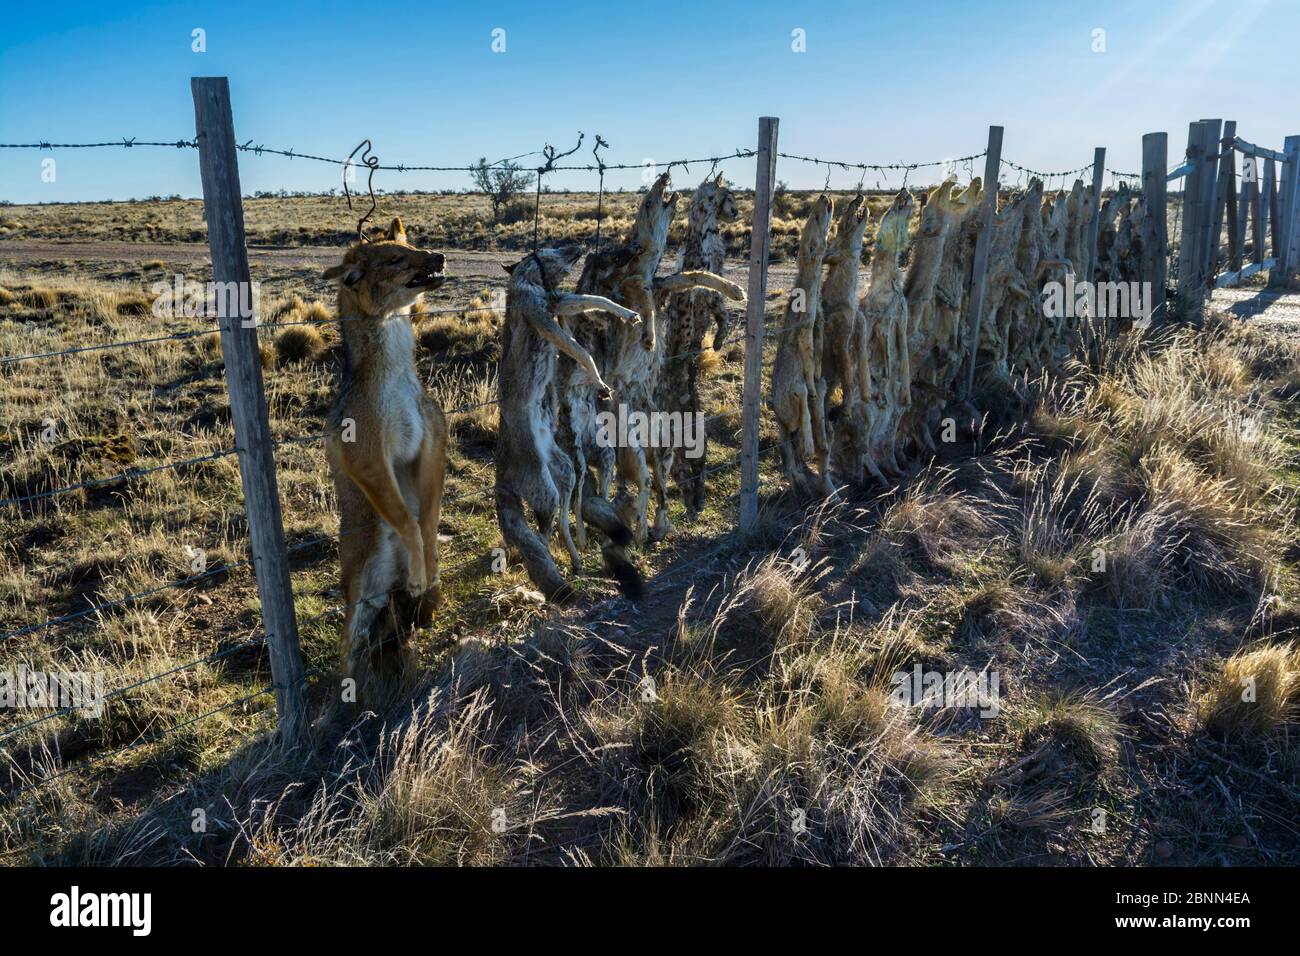 Dead Pampas fox (Lycalopex gymnocercus) Grey fox (Lycalopex culpaeus) and Geffroy's cat (Oncifelis geoffroyi) killed by sheep farmers and hung up to d Stock Photo